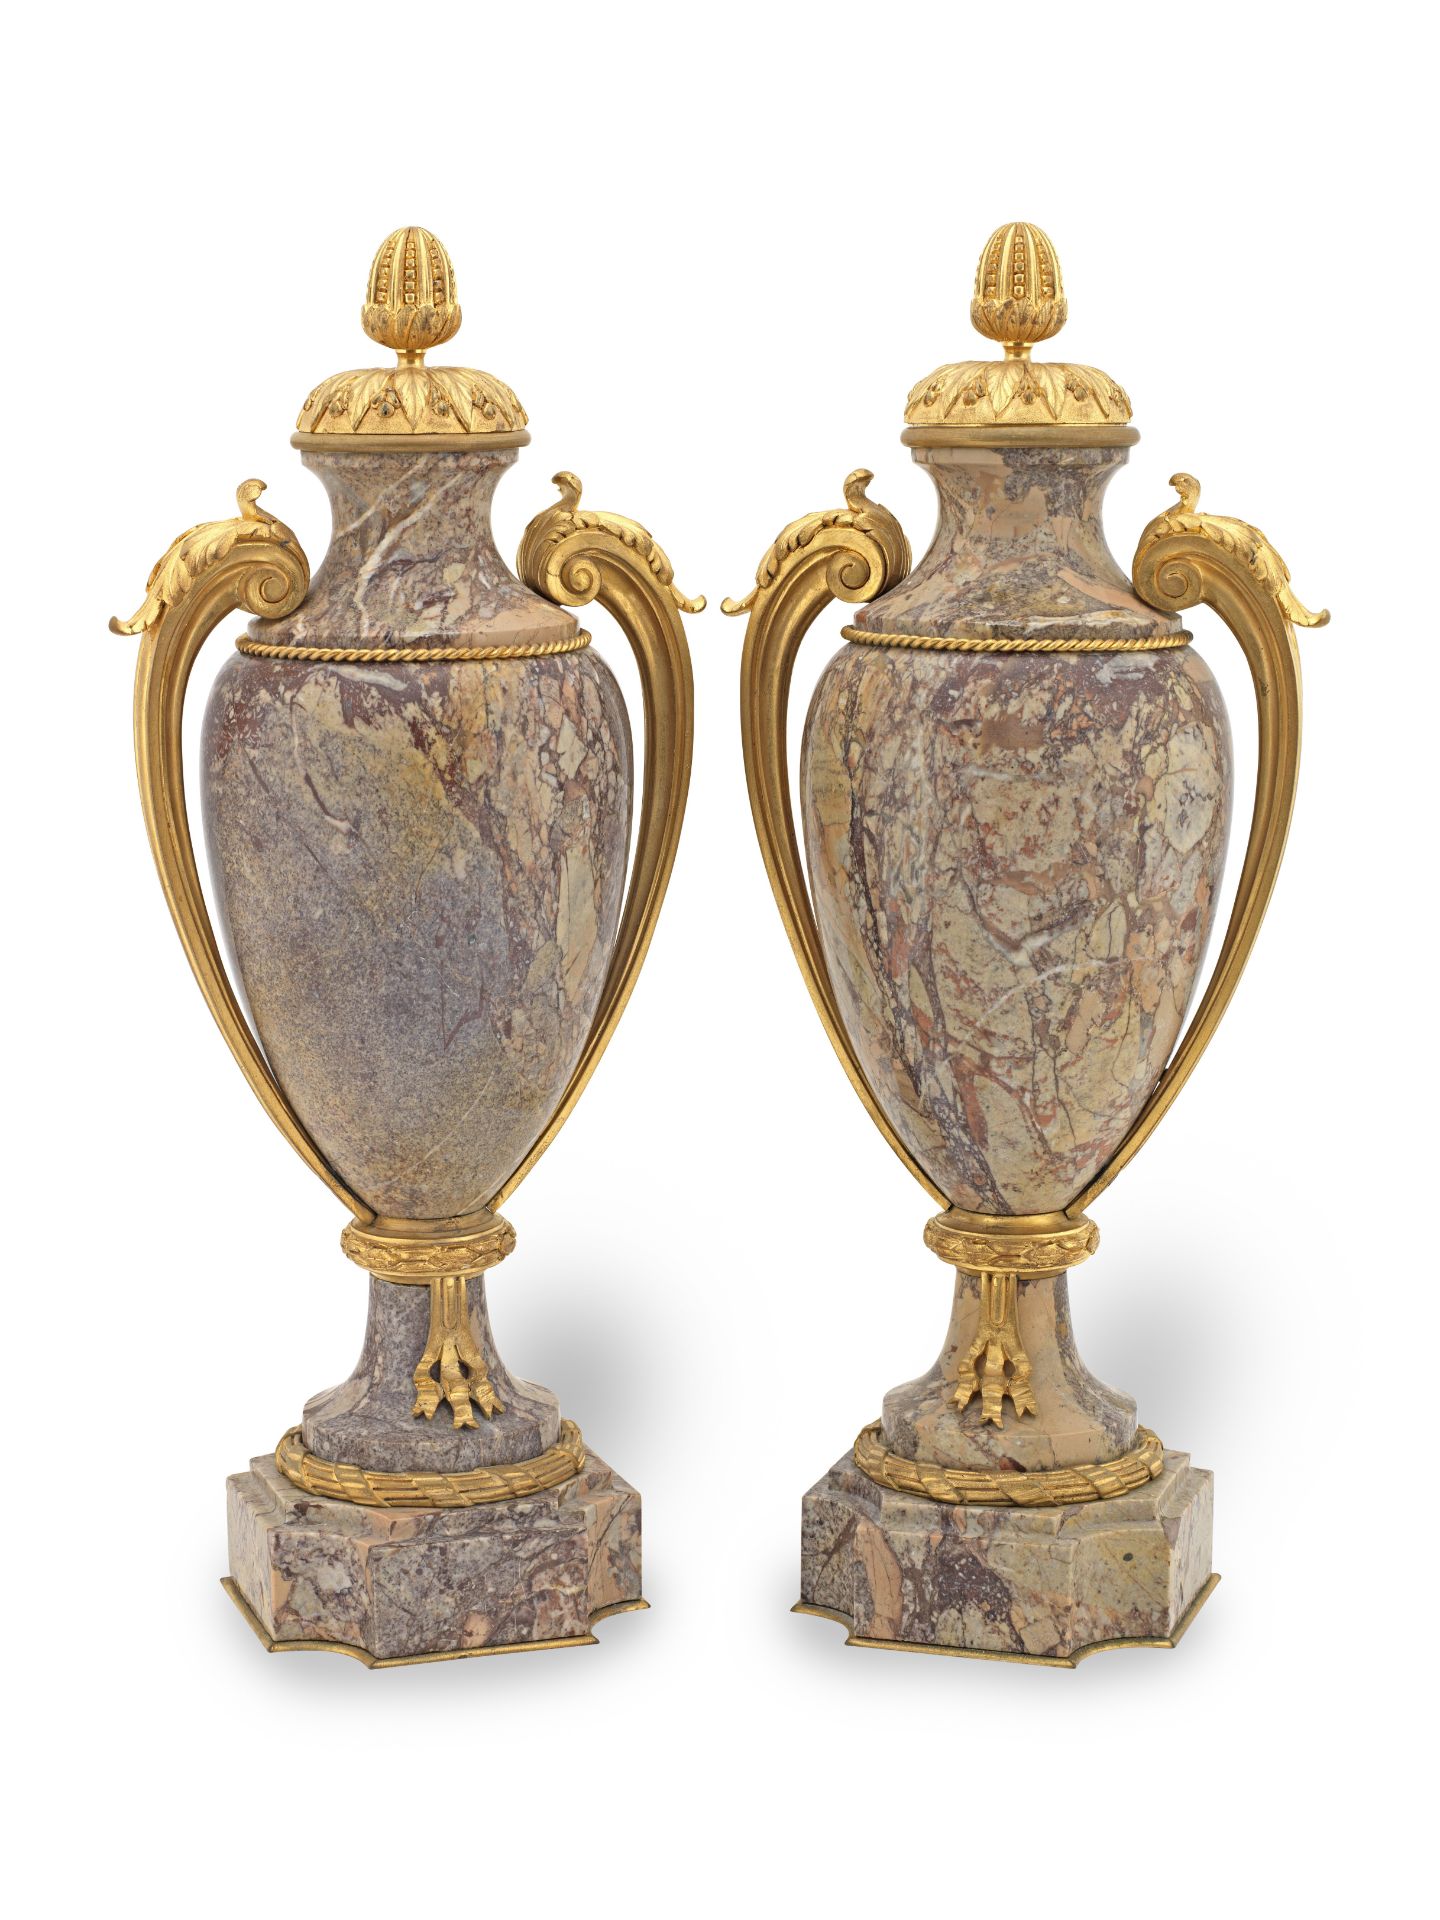 A pair of Louis XVI style ormolu and breccia rosa baluster vases (2)